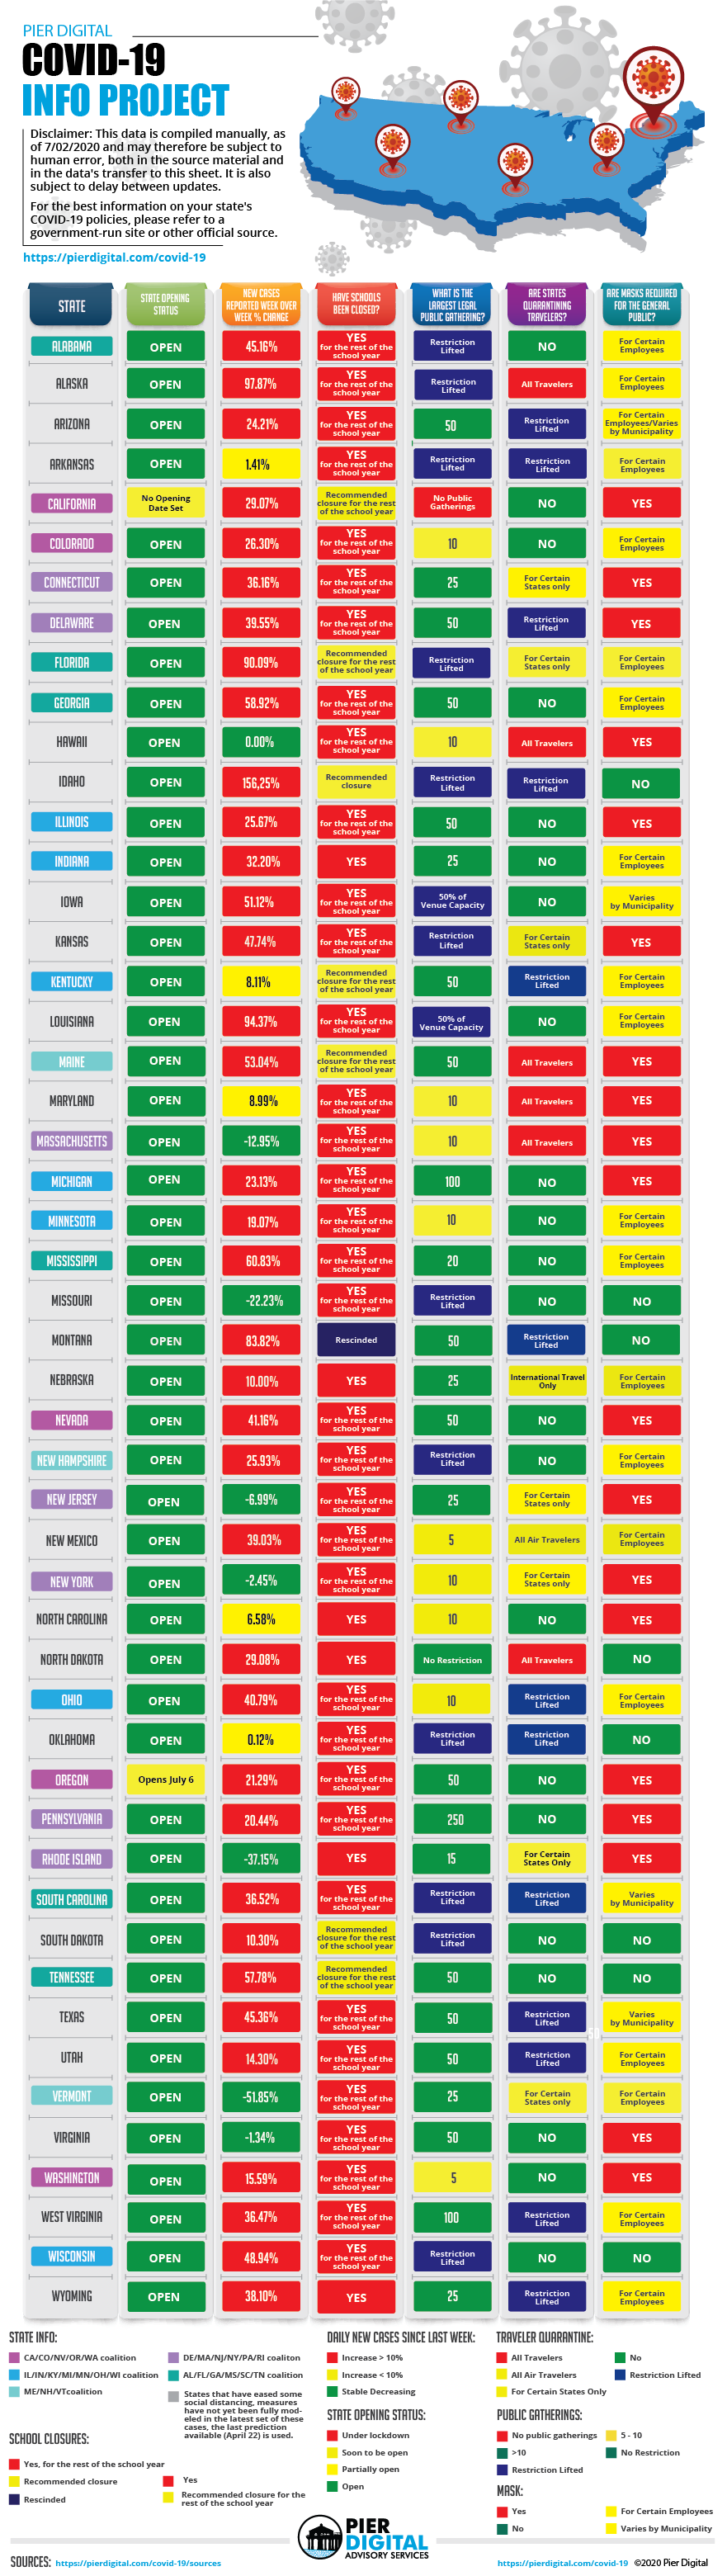 Pier Digital COVID-19 State by State Infographic